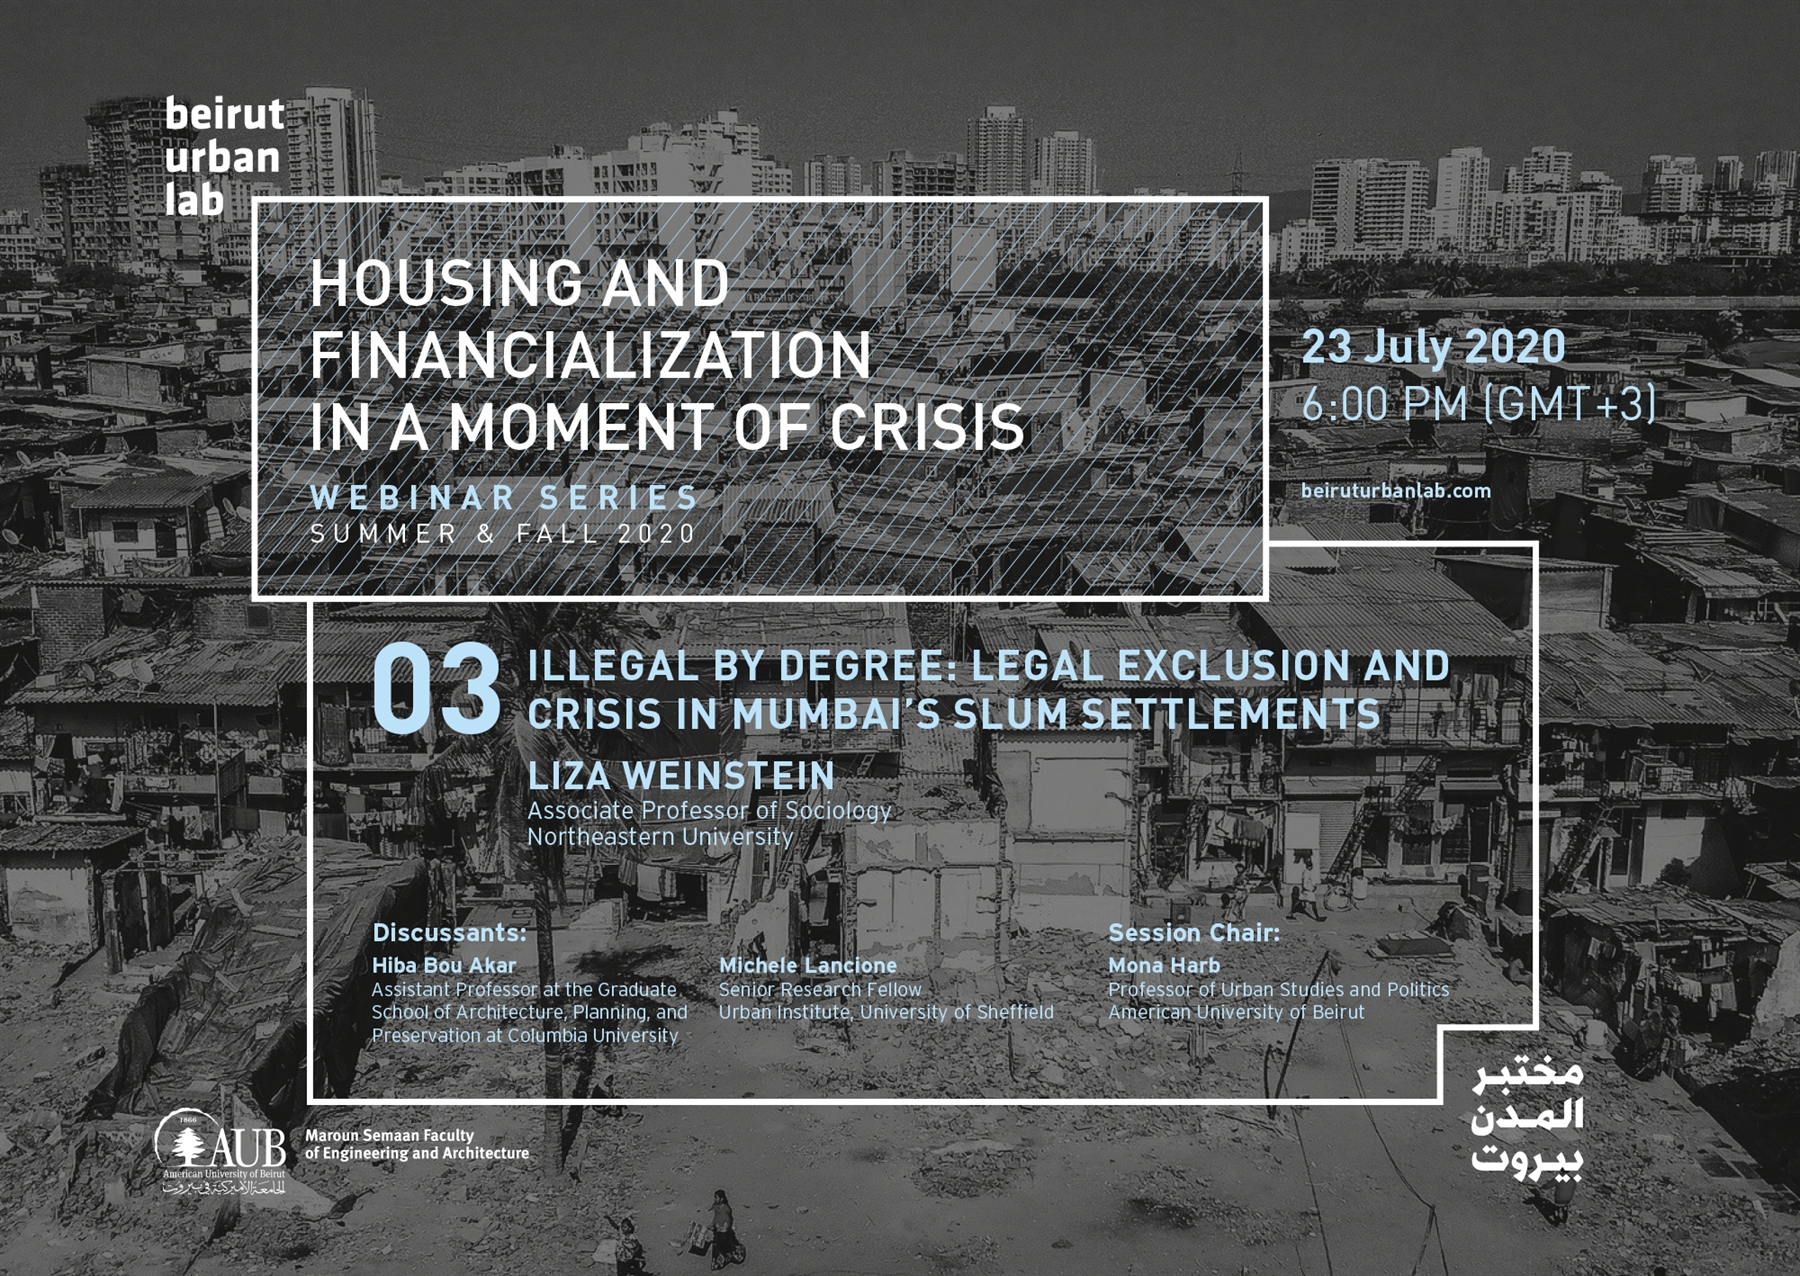 Liza Weinstein: Illegal by Degree: Legal Exclusion and Crisis in Mumbai’s Slum Settlements